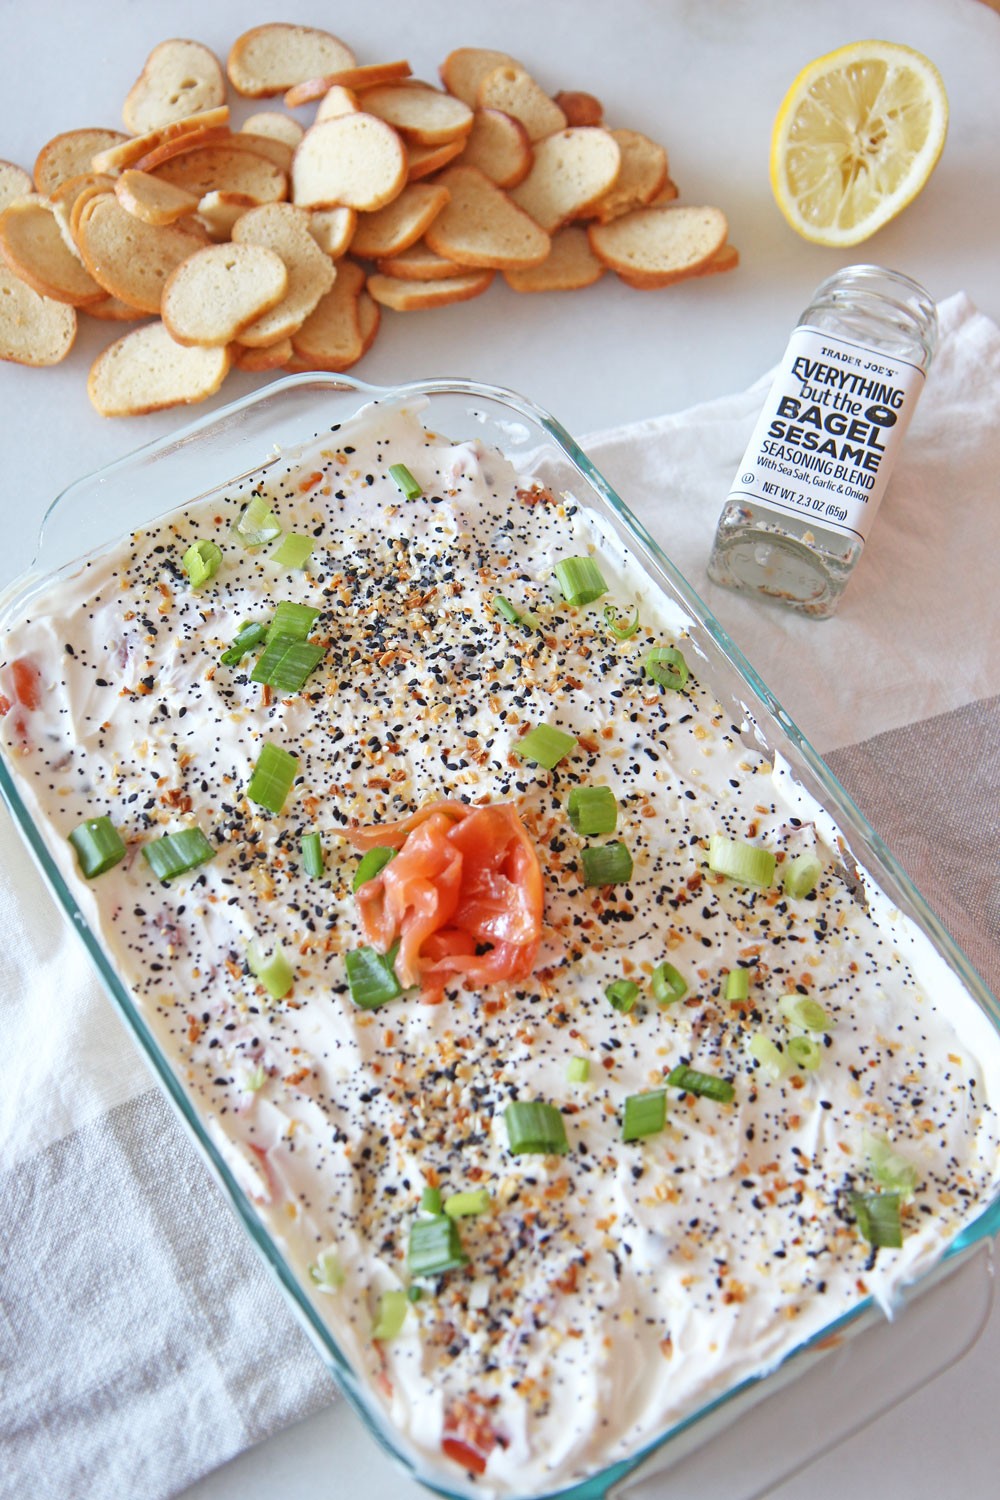 7 Layer Everything Bagel Dip Recipe. Perfect appetizer that tastes like a bagel and lox. Quick and easy starter that you can make a day in advance. Also a great host gift for the holidays. Happy Cooking! www.ChopHappy.com #everythingseasoning #7layerdip